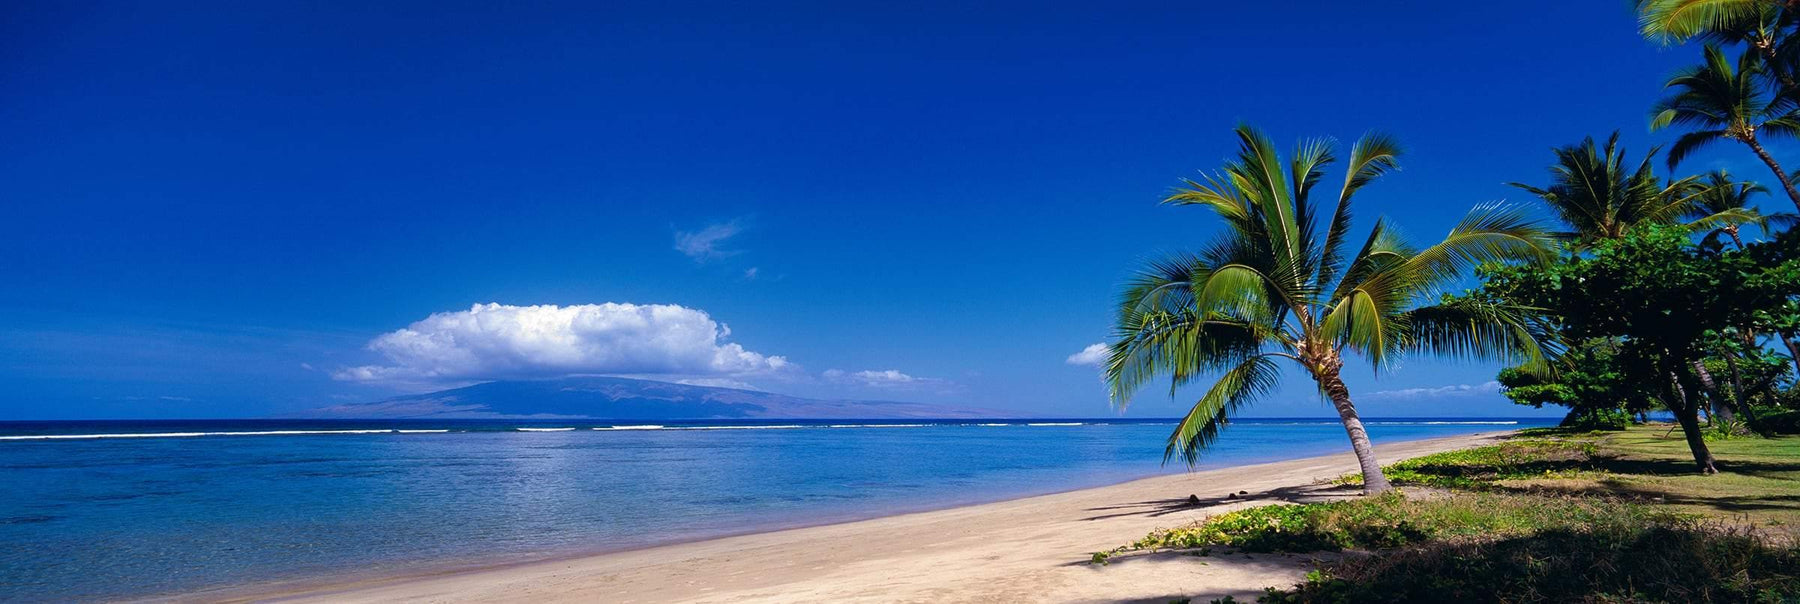 Palm trees on the edge of Baby Beach Hawaii with a cloud covering the distant island of Molokai